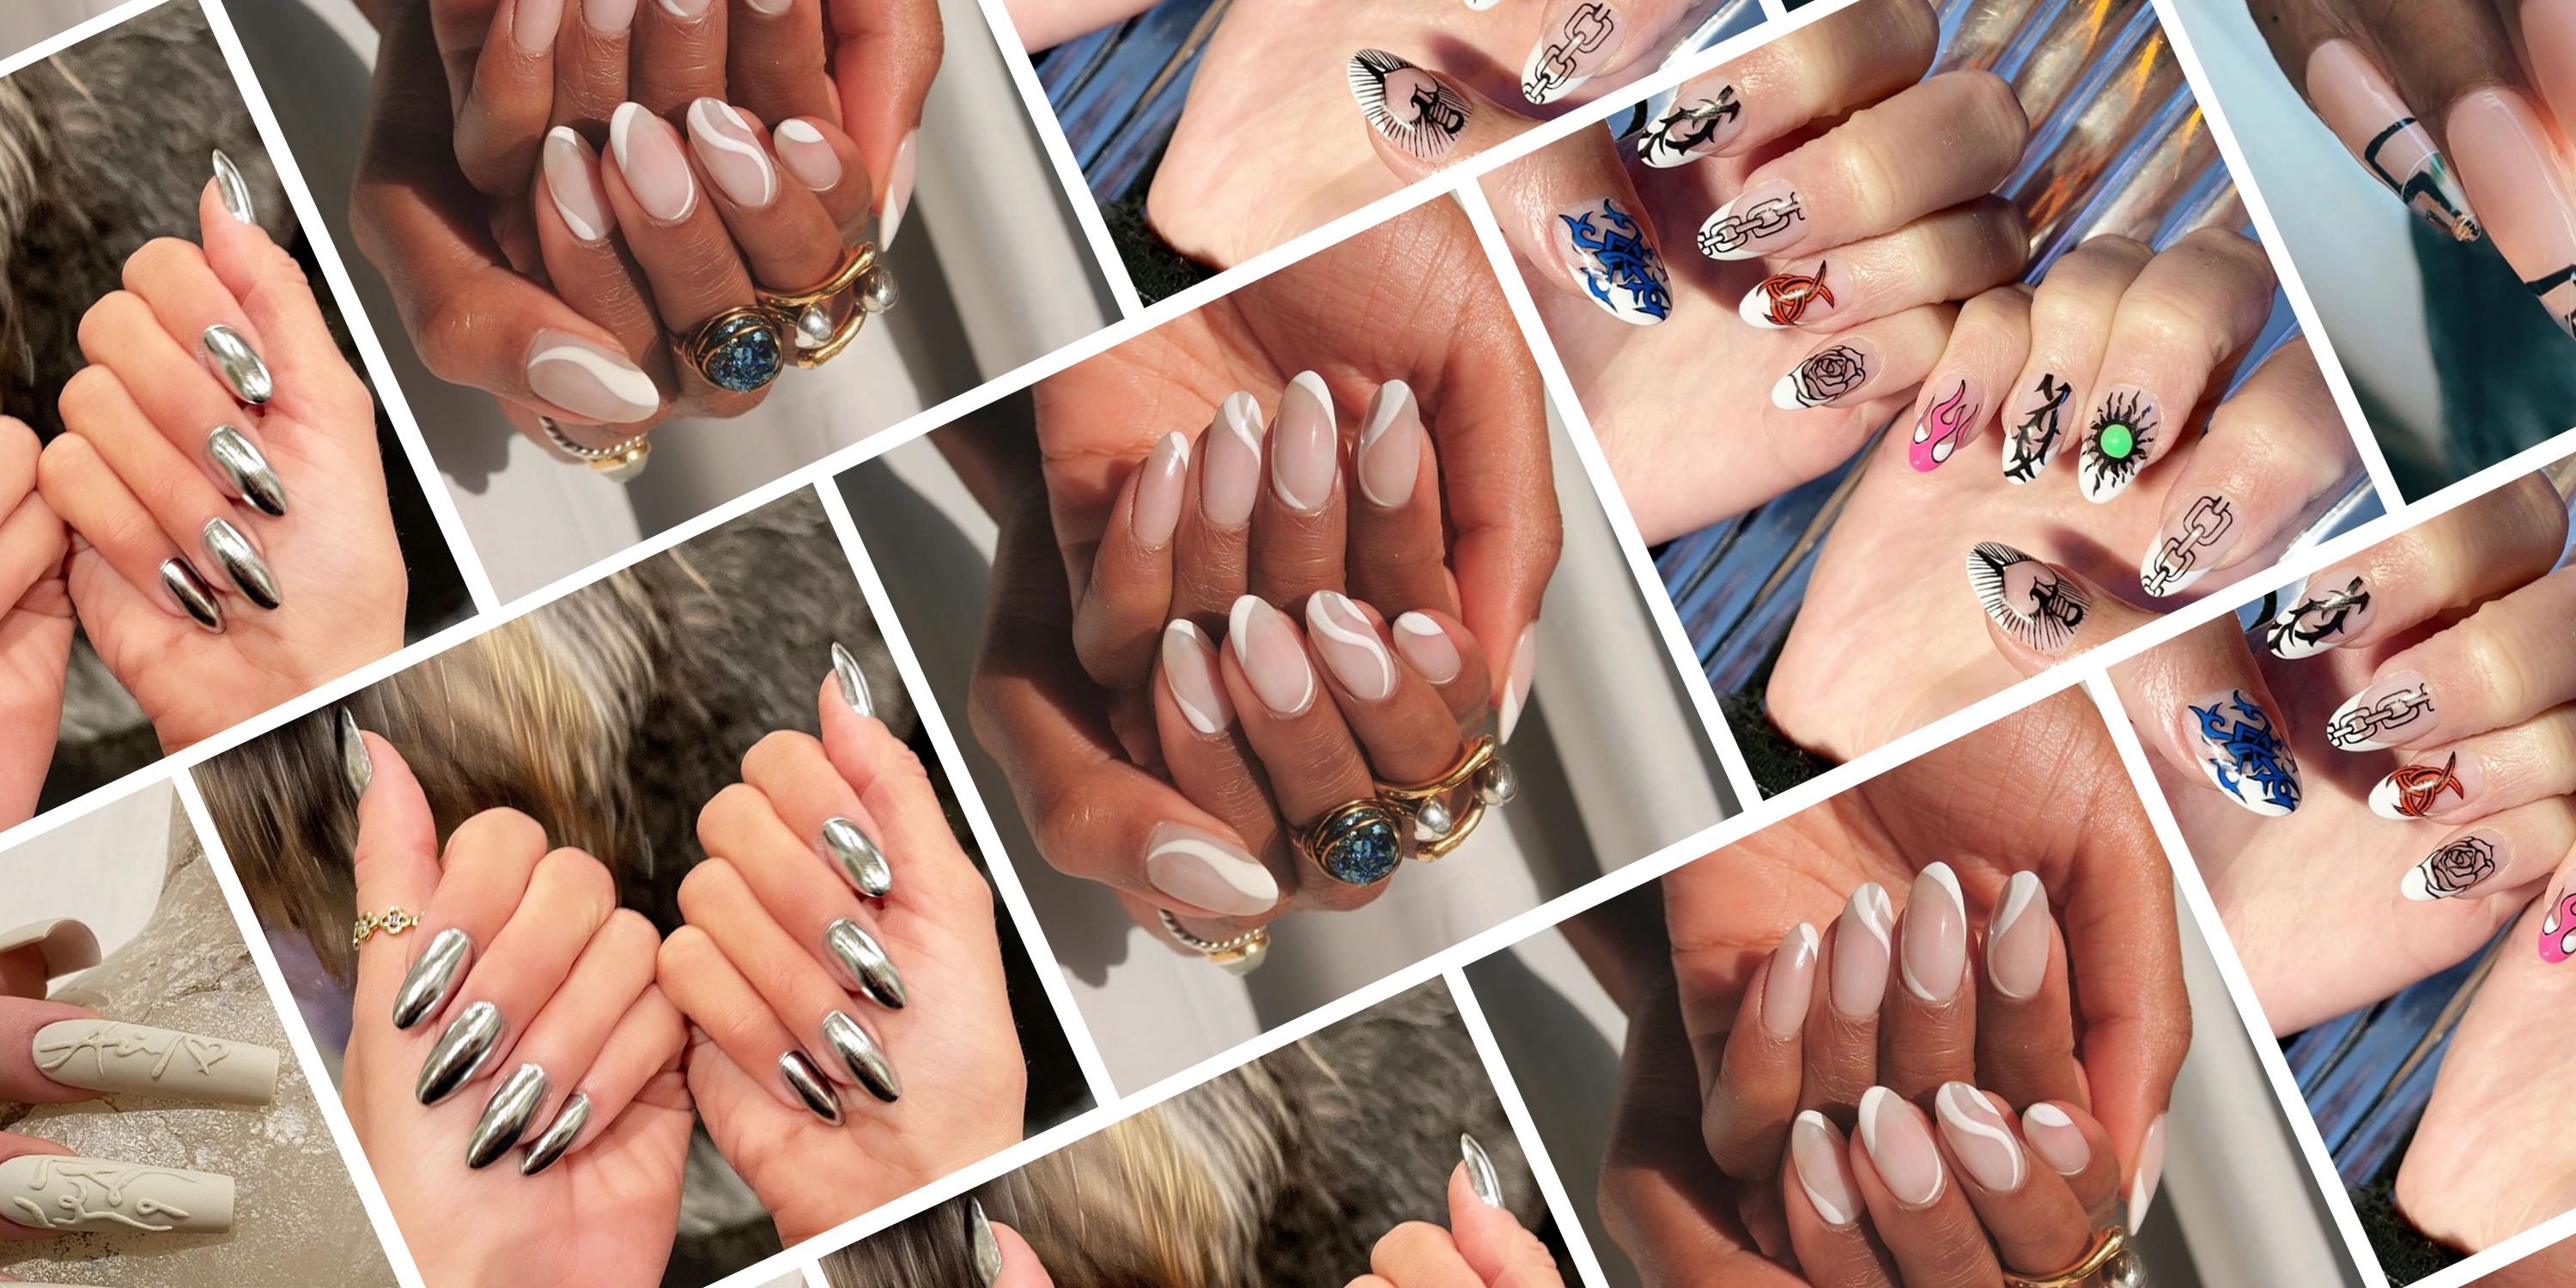 The Coolest Summer 2021 Nail Art Trends - Manicure Ideas For Summer